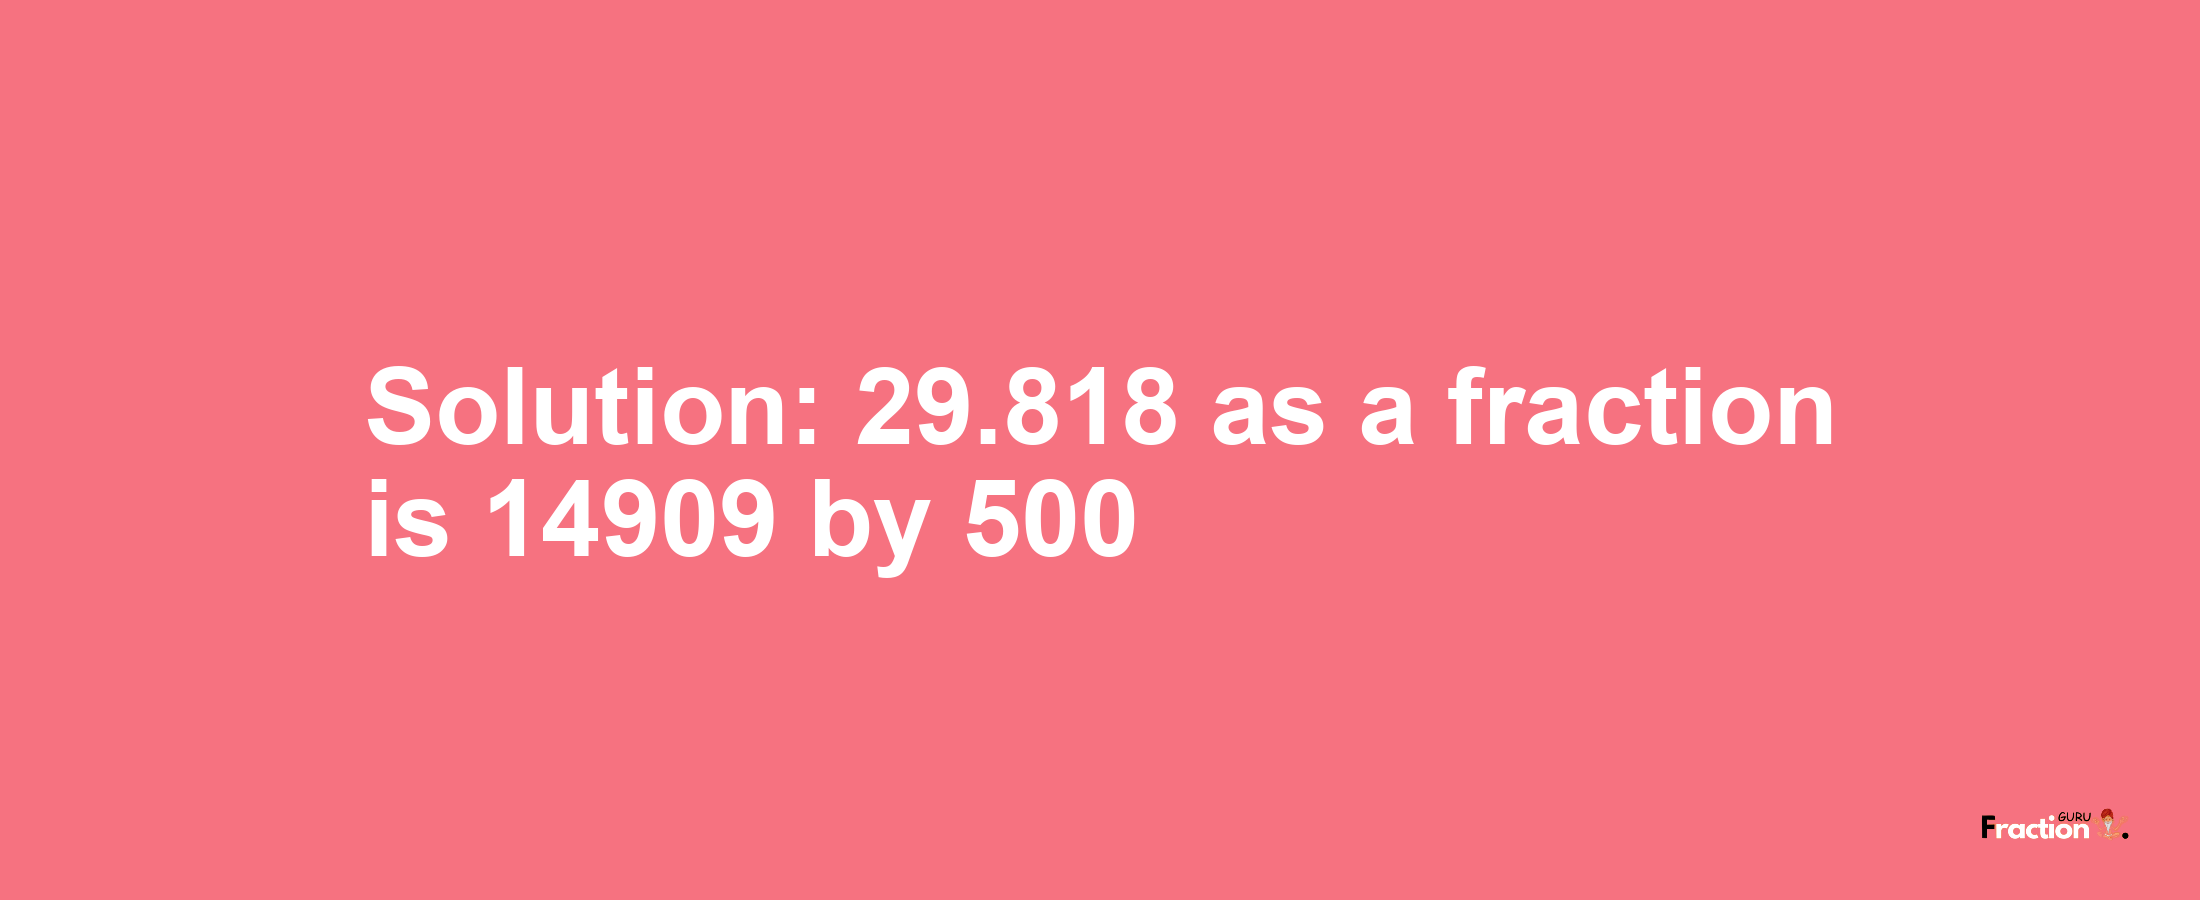 Solution:29.818 as a fraction is 14909/500